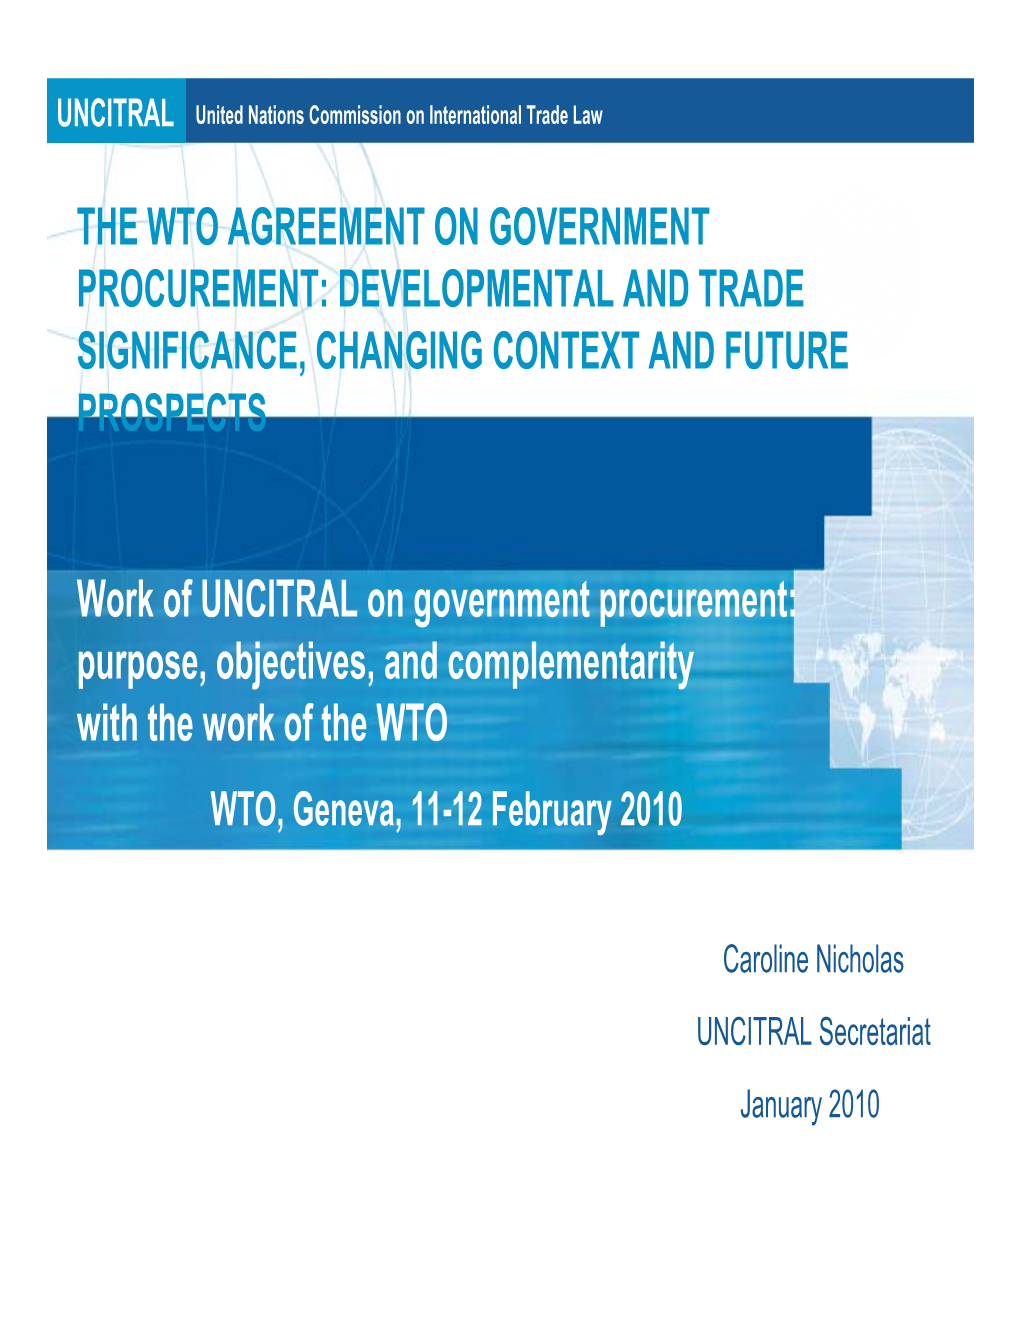 Work of UNCITRAL on Government Procurement: Purpose, Objectives, and Complementarity with the Work of the WTO WTO, Geneva, 11-12 February 2010